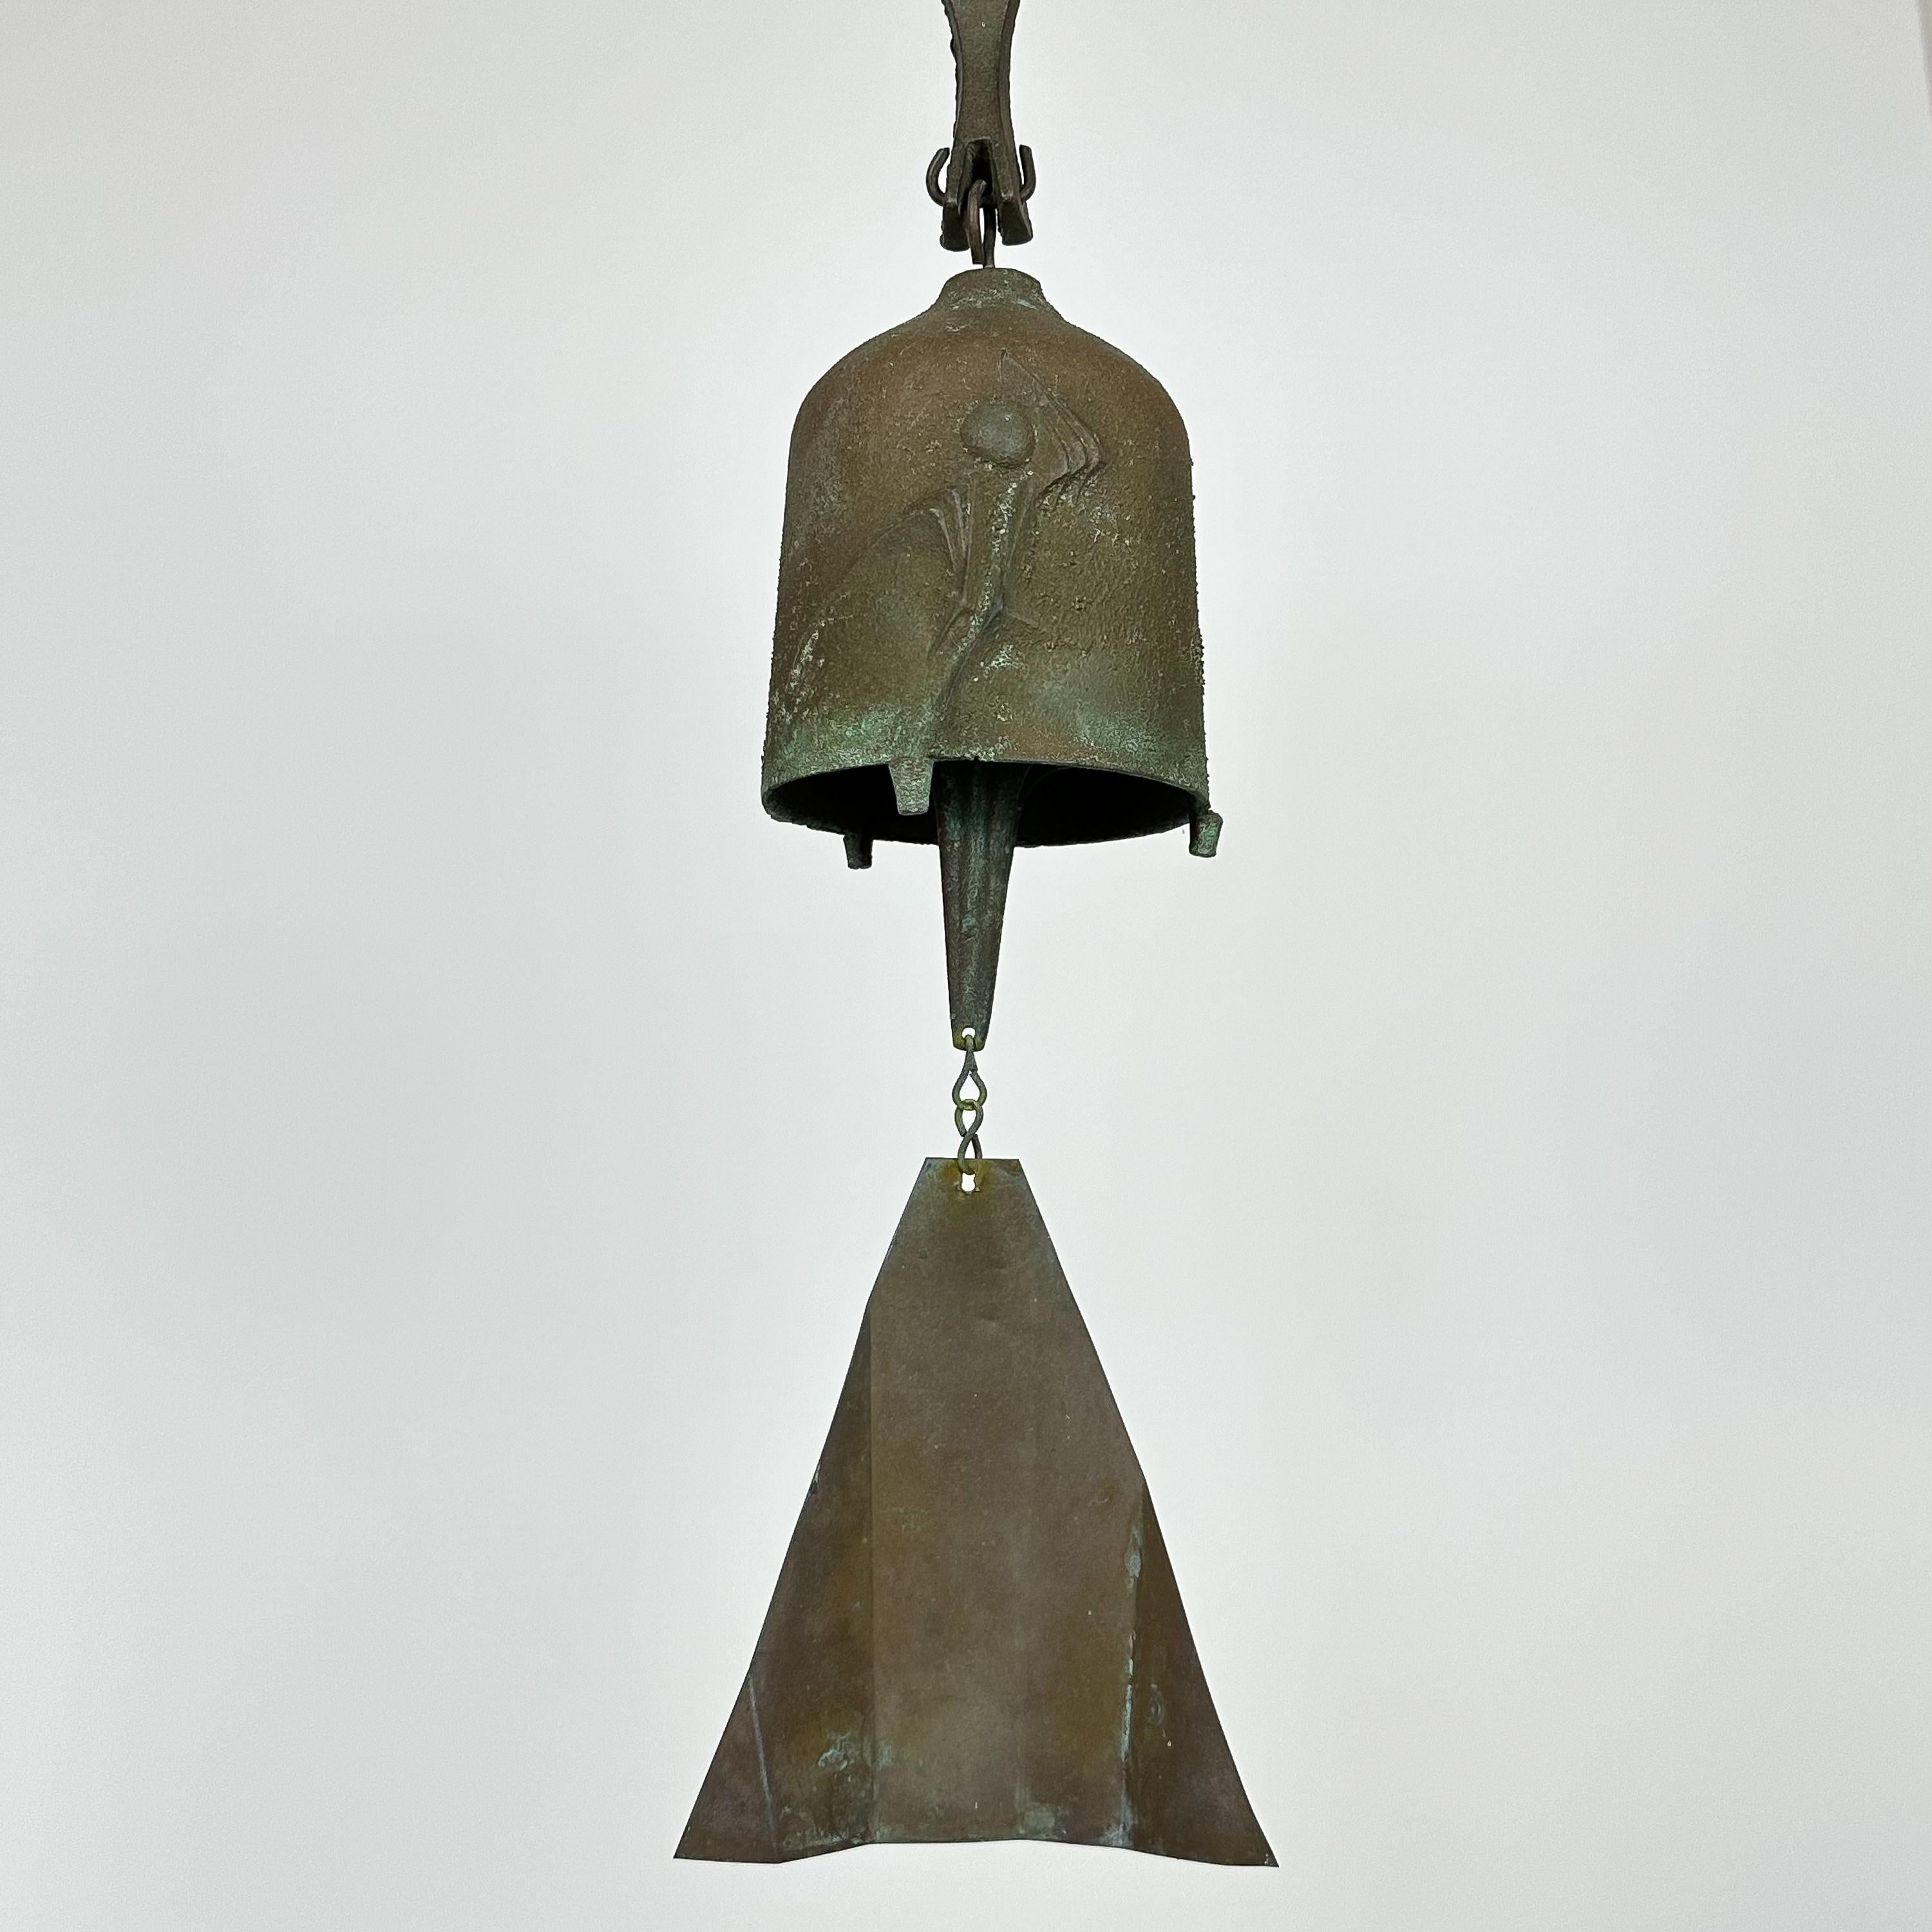 Cast Mid-Century Bronze Bell / Wind Chime by Paolo Soleri for Arcosanti